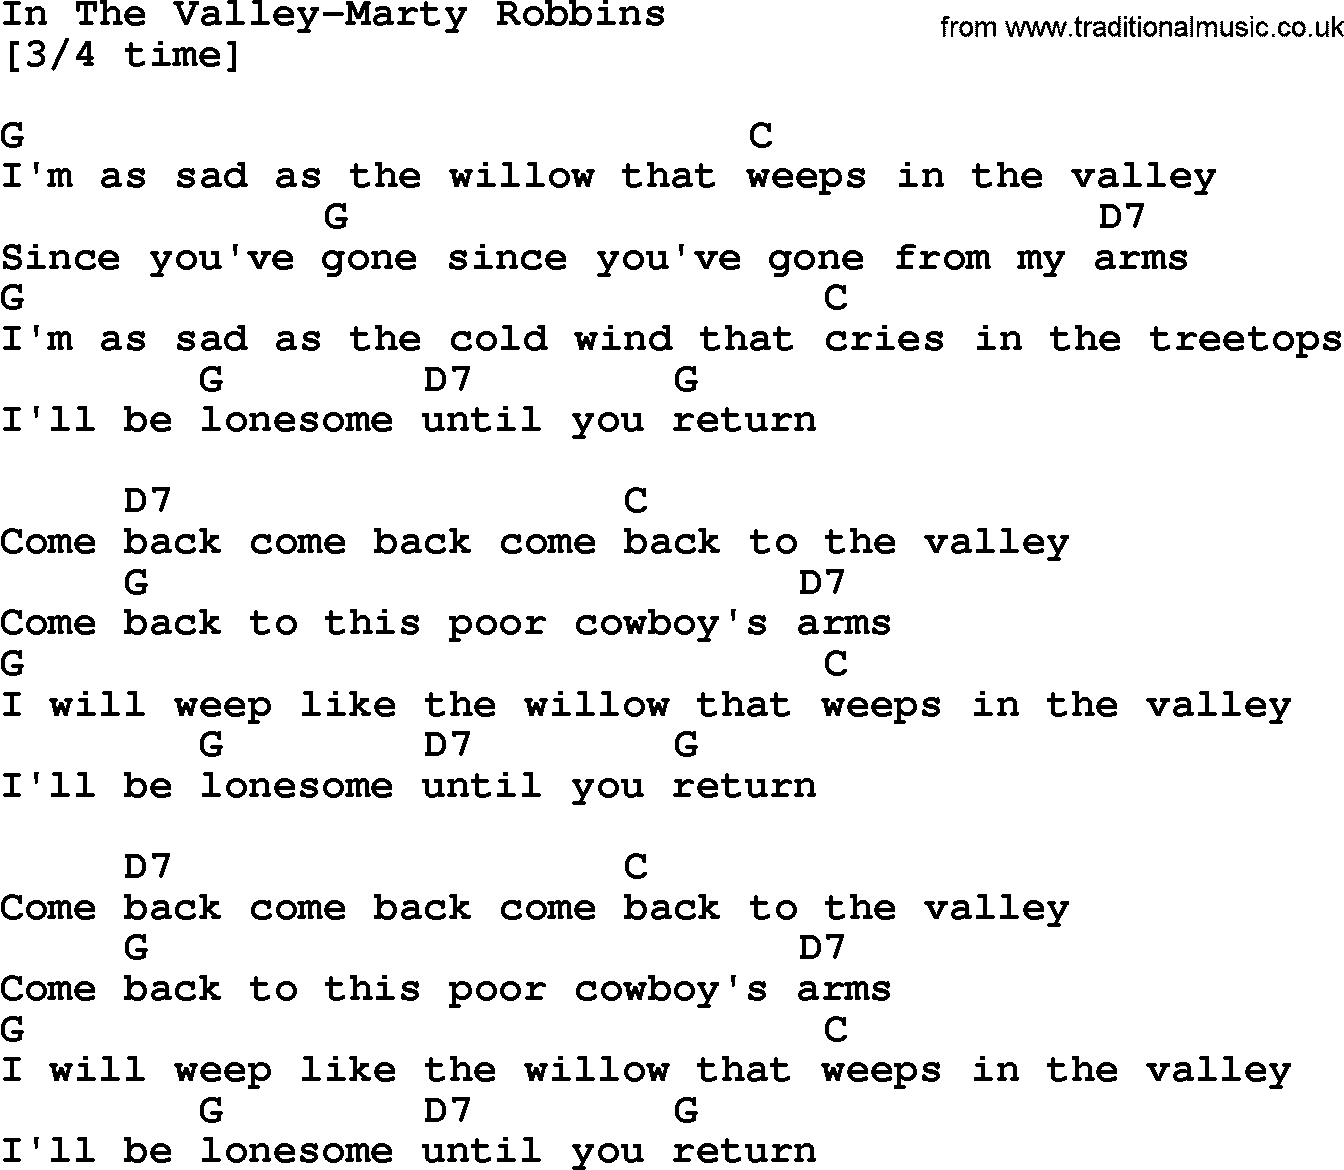 Country music song: In The Valley-Marty Robbins lyrics and chords